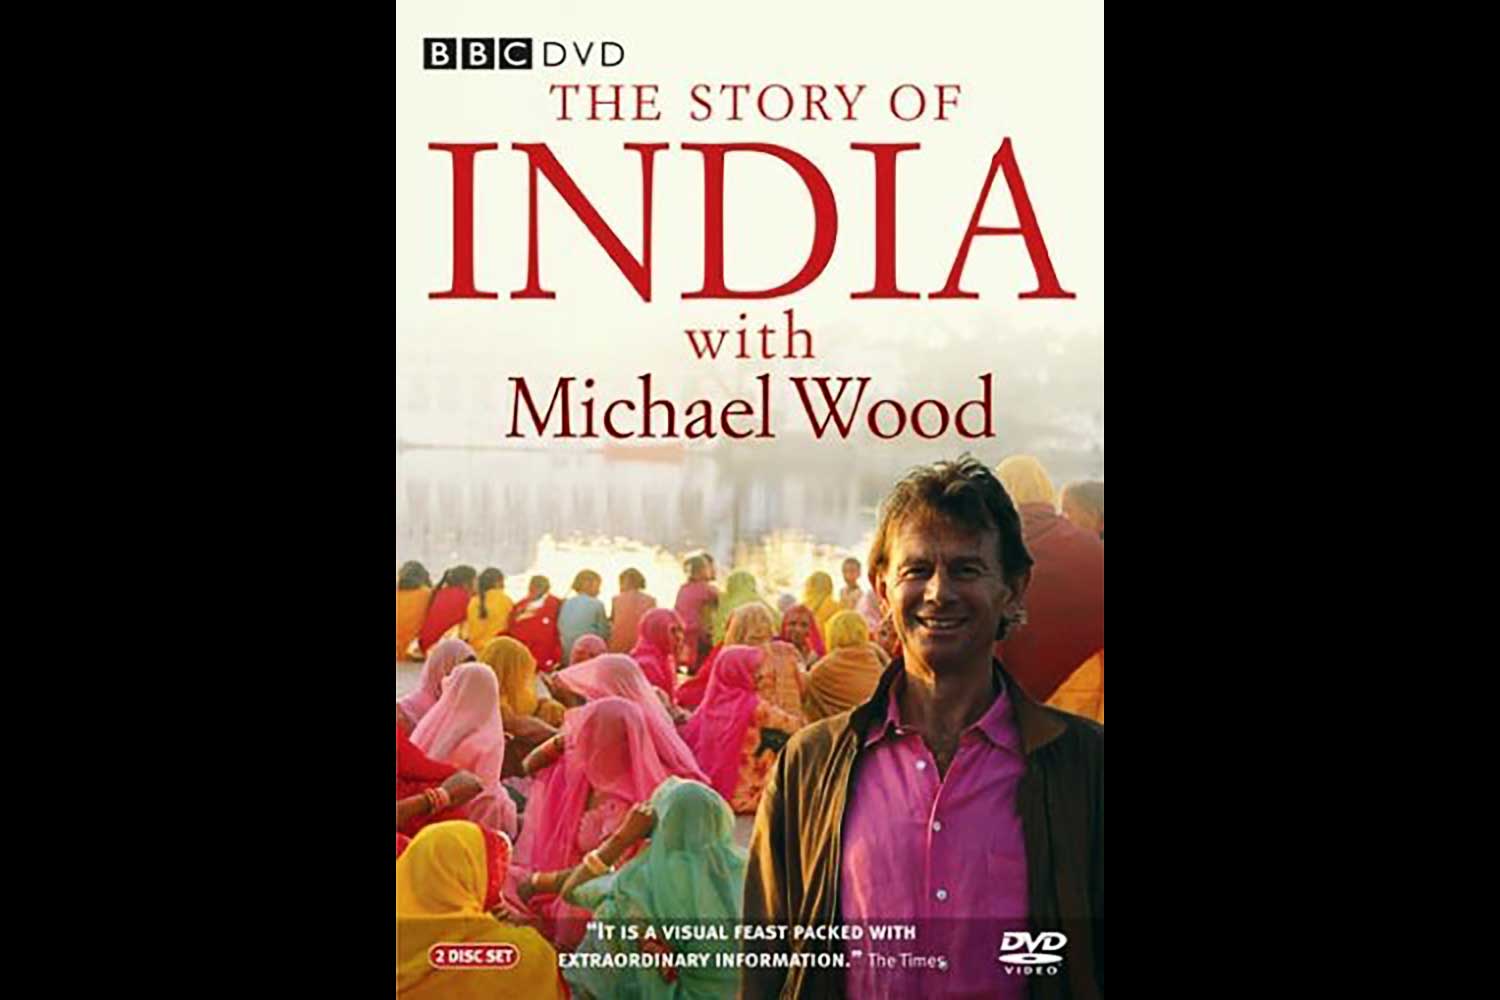 Michael Wood, and The Story of India